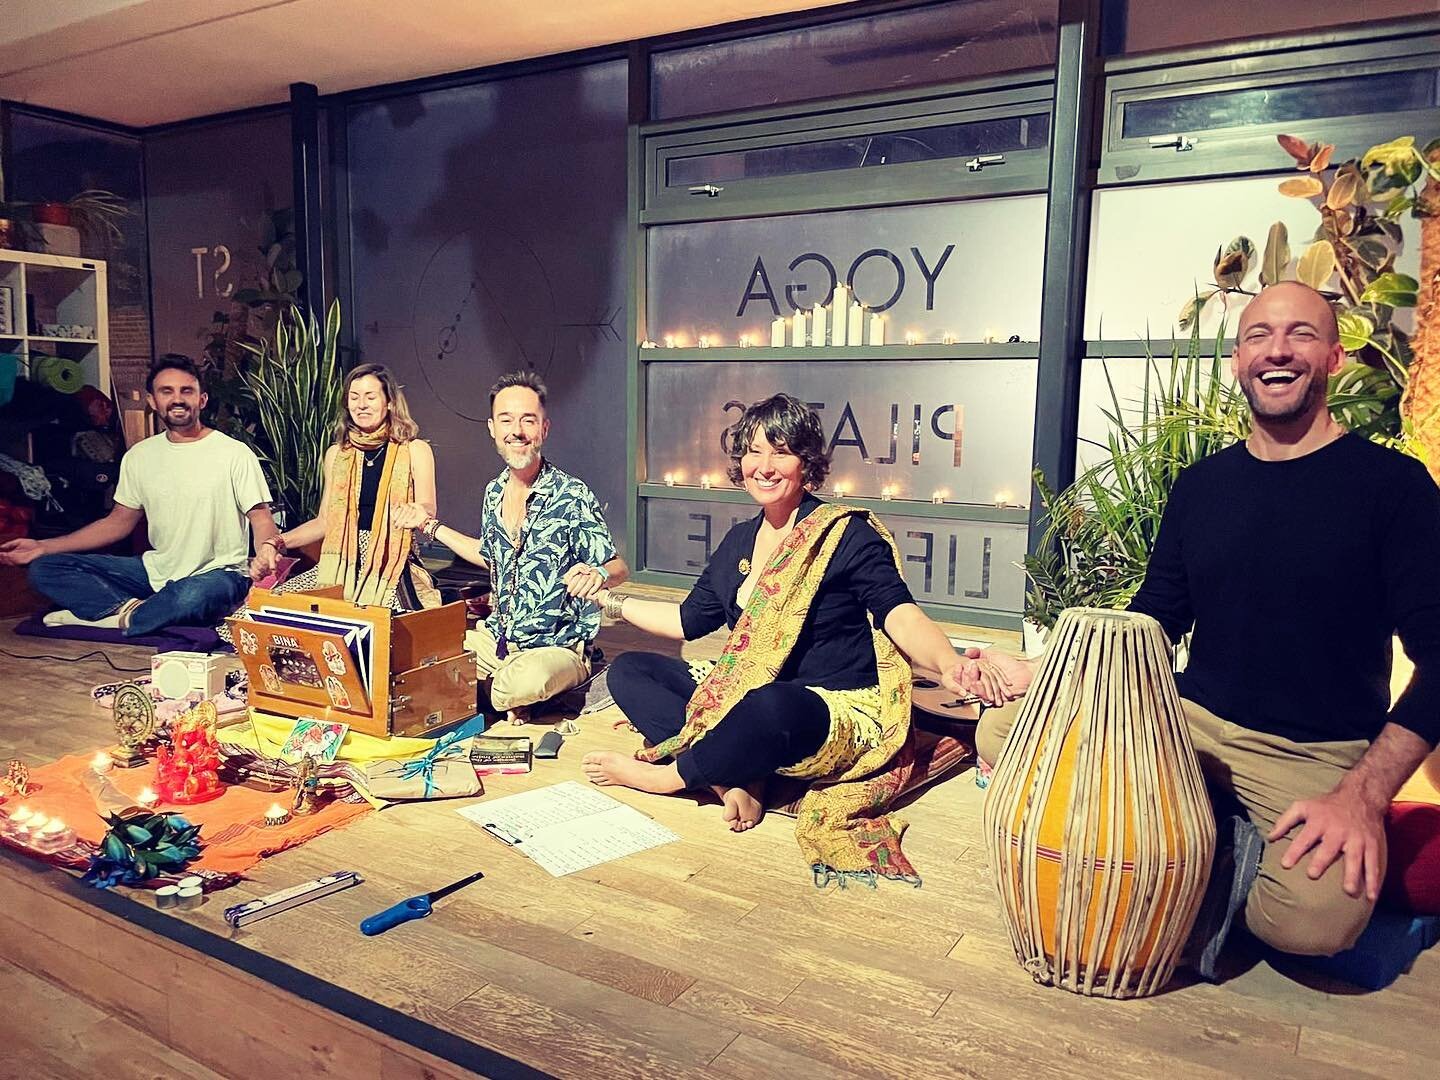 The biggest thanks to James, his amazing team of musicians, and all of you for bringing your hearts and voices to East of Eden on Friday for Kirtan, and raising over &pound;1000 for @railwaychildrenindia. Also huge thanks to the team at the studio fo